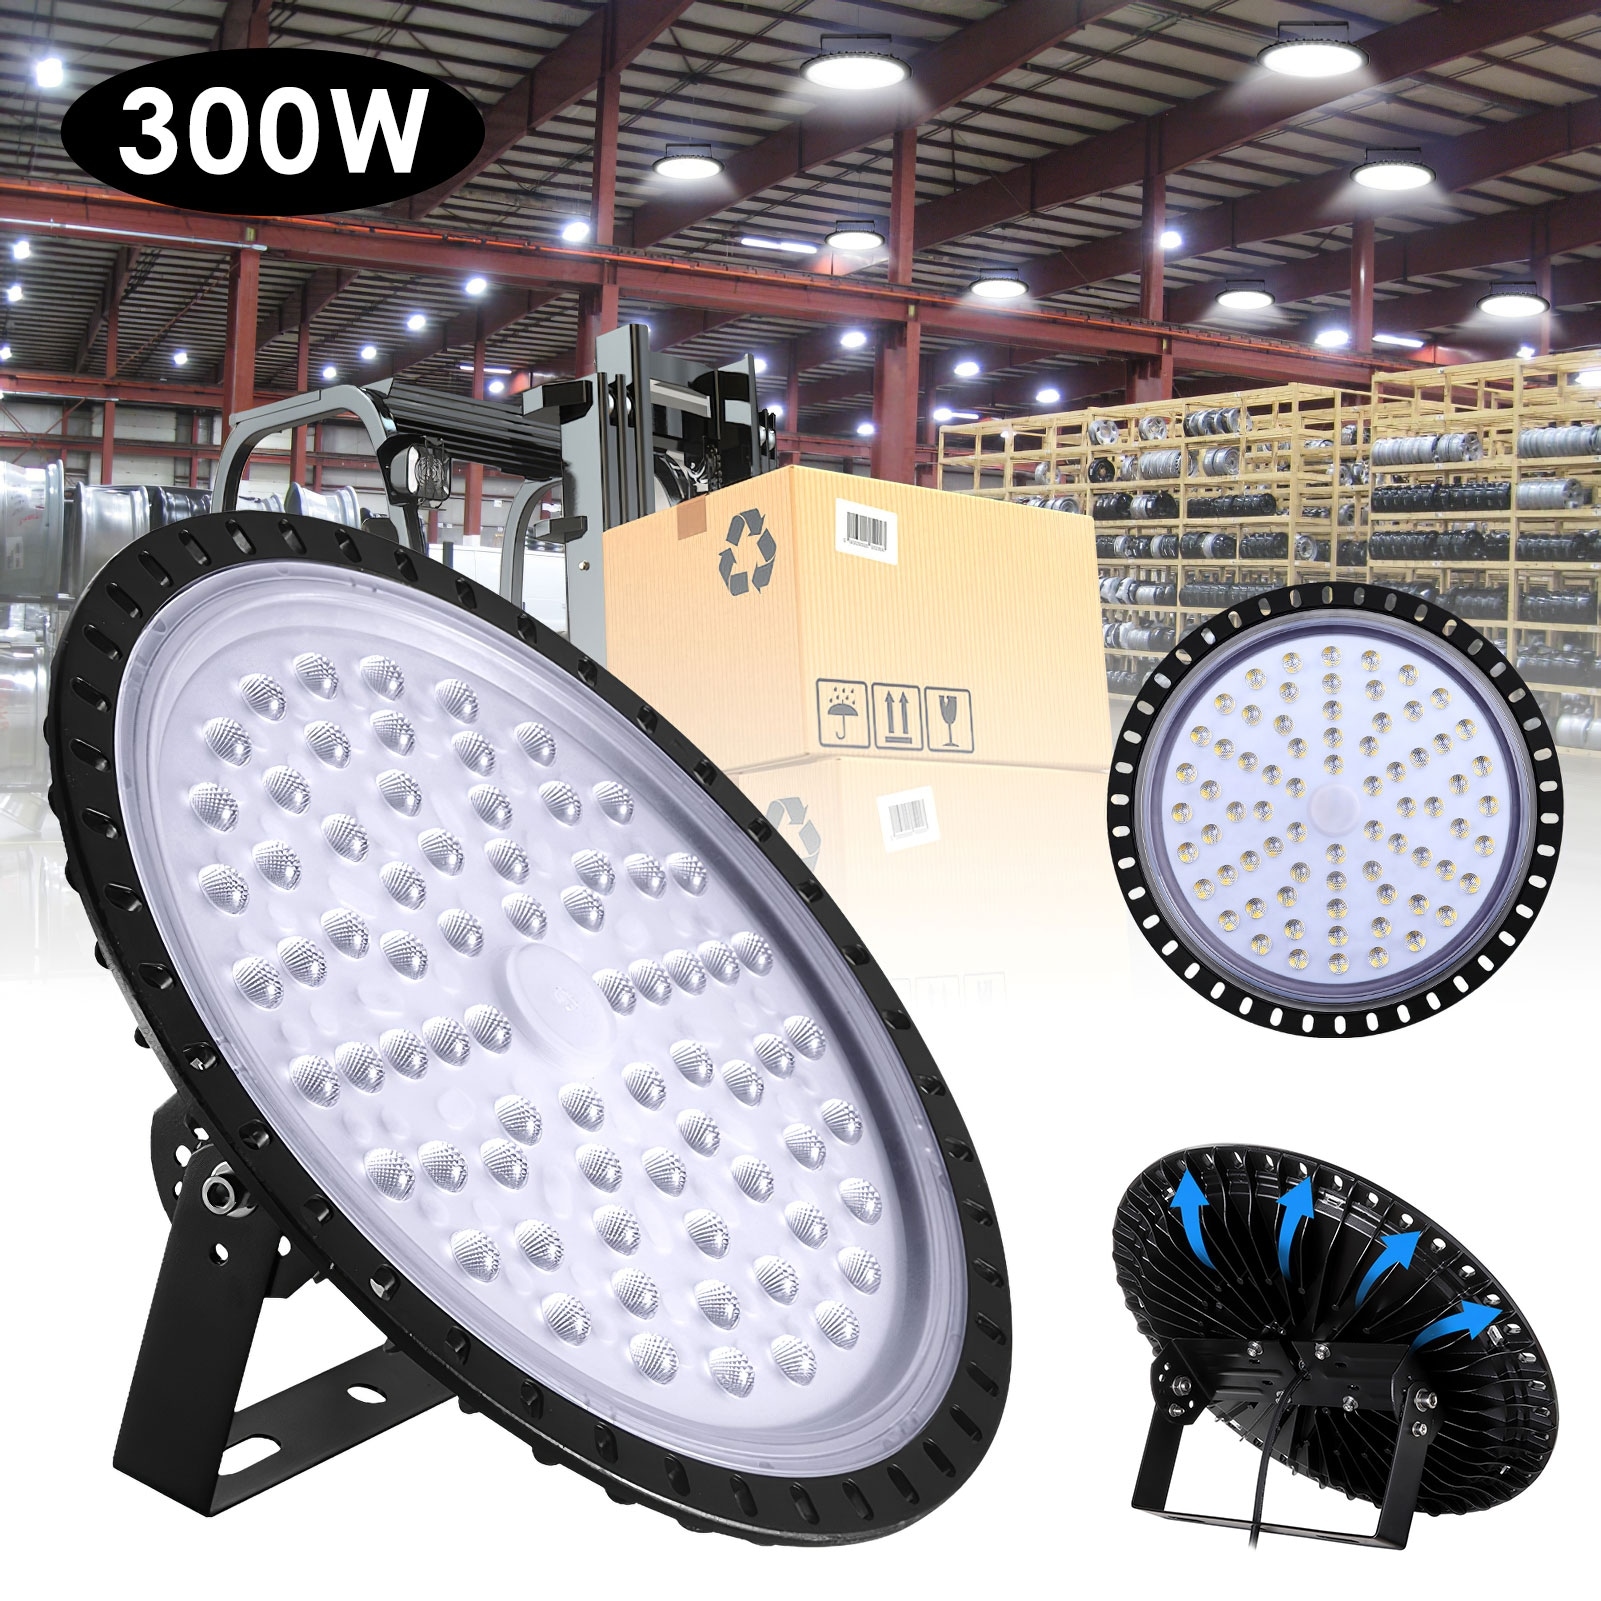 UFO LED Lighting 100 Glass Ceiling 50W 100W 200W 300W 500W Bright Commercial Lighting Bay Lights Led Warehouse Glass Ceiling Lamp 